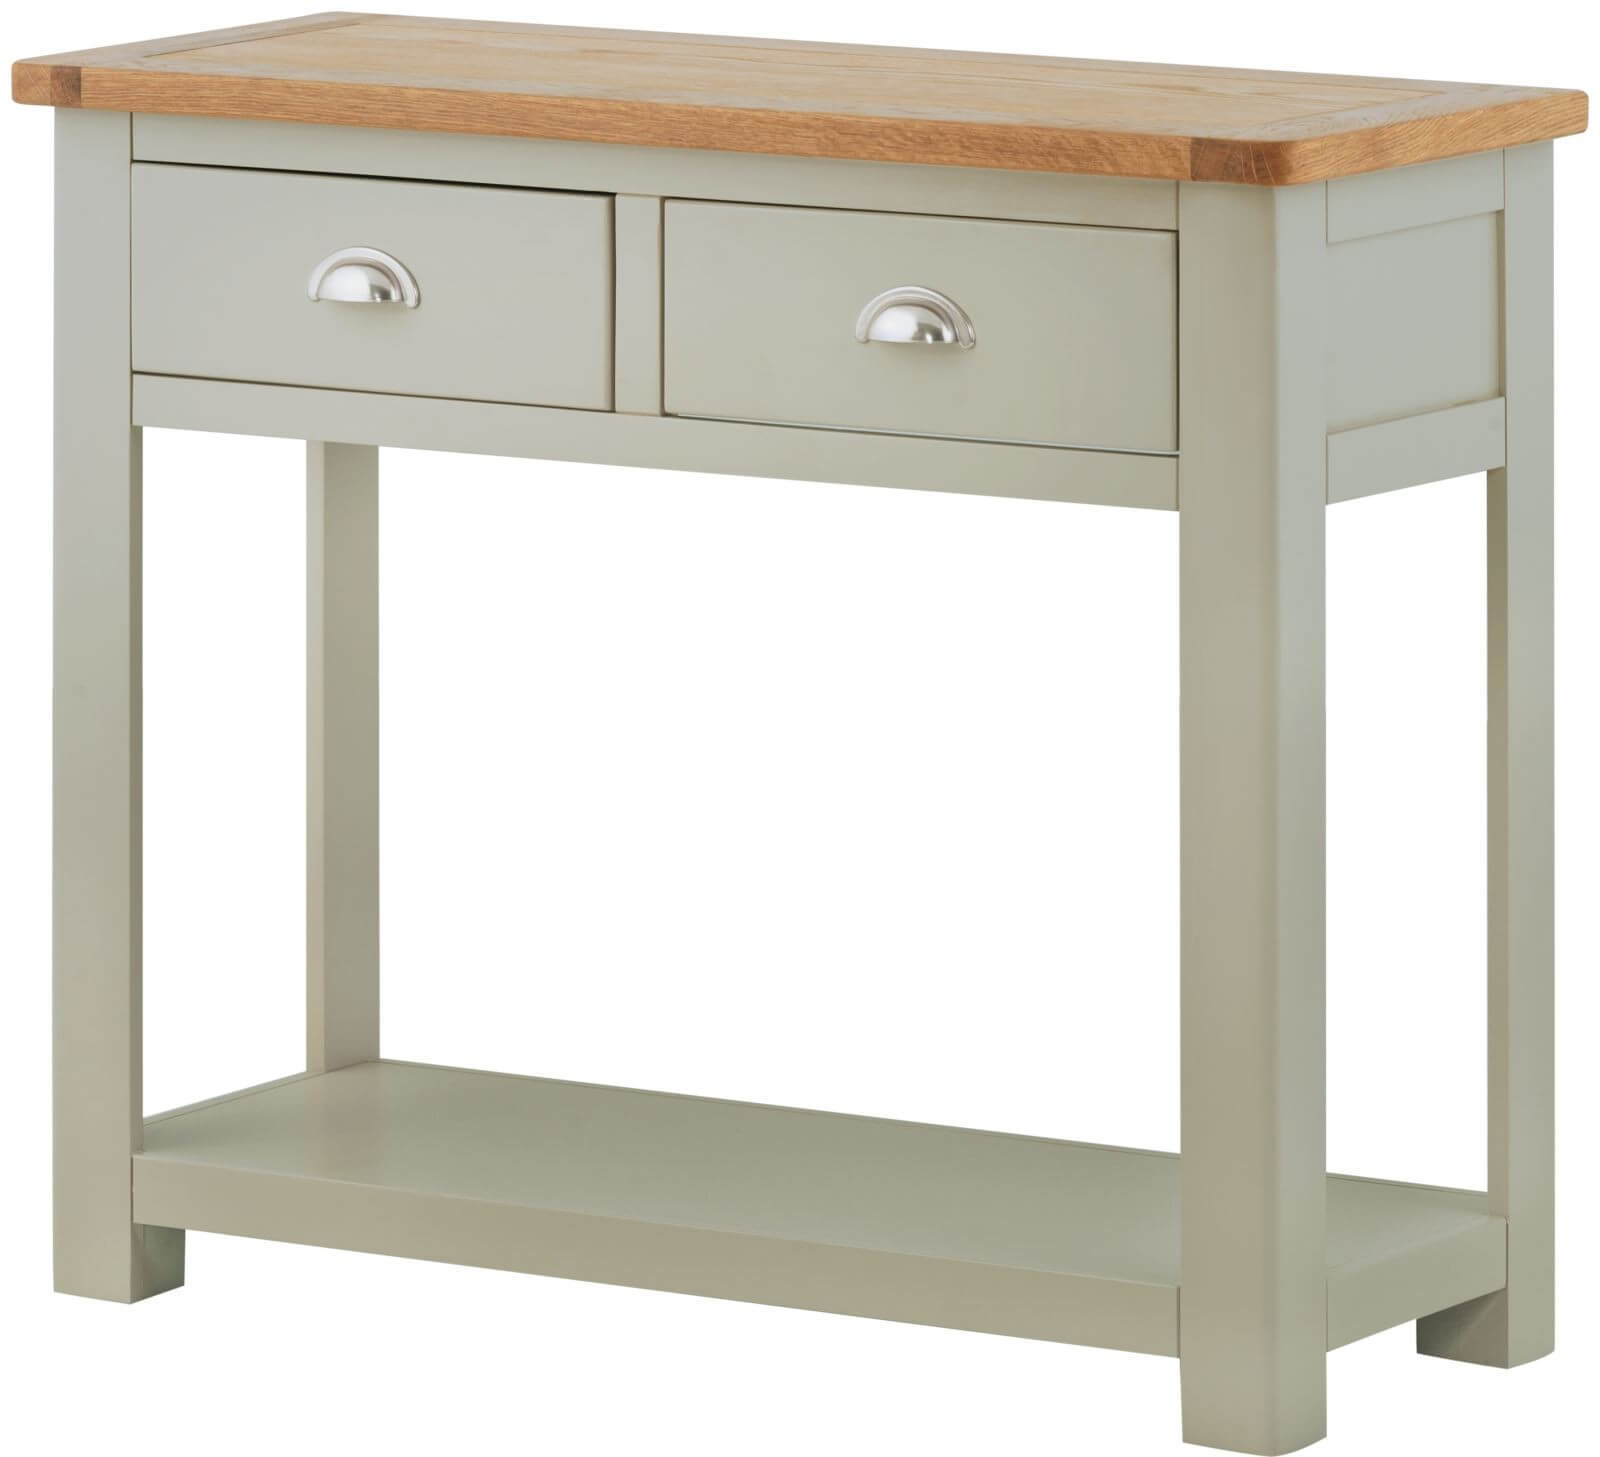 Showing image for Seattle console table - stone